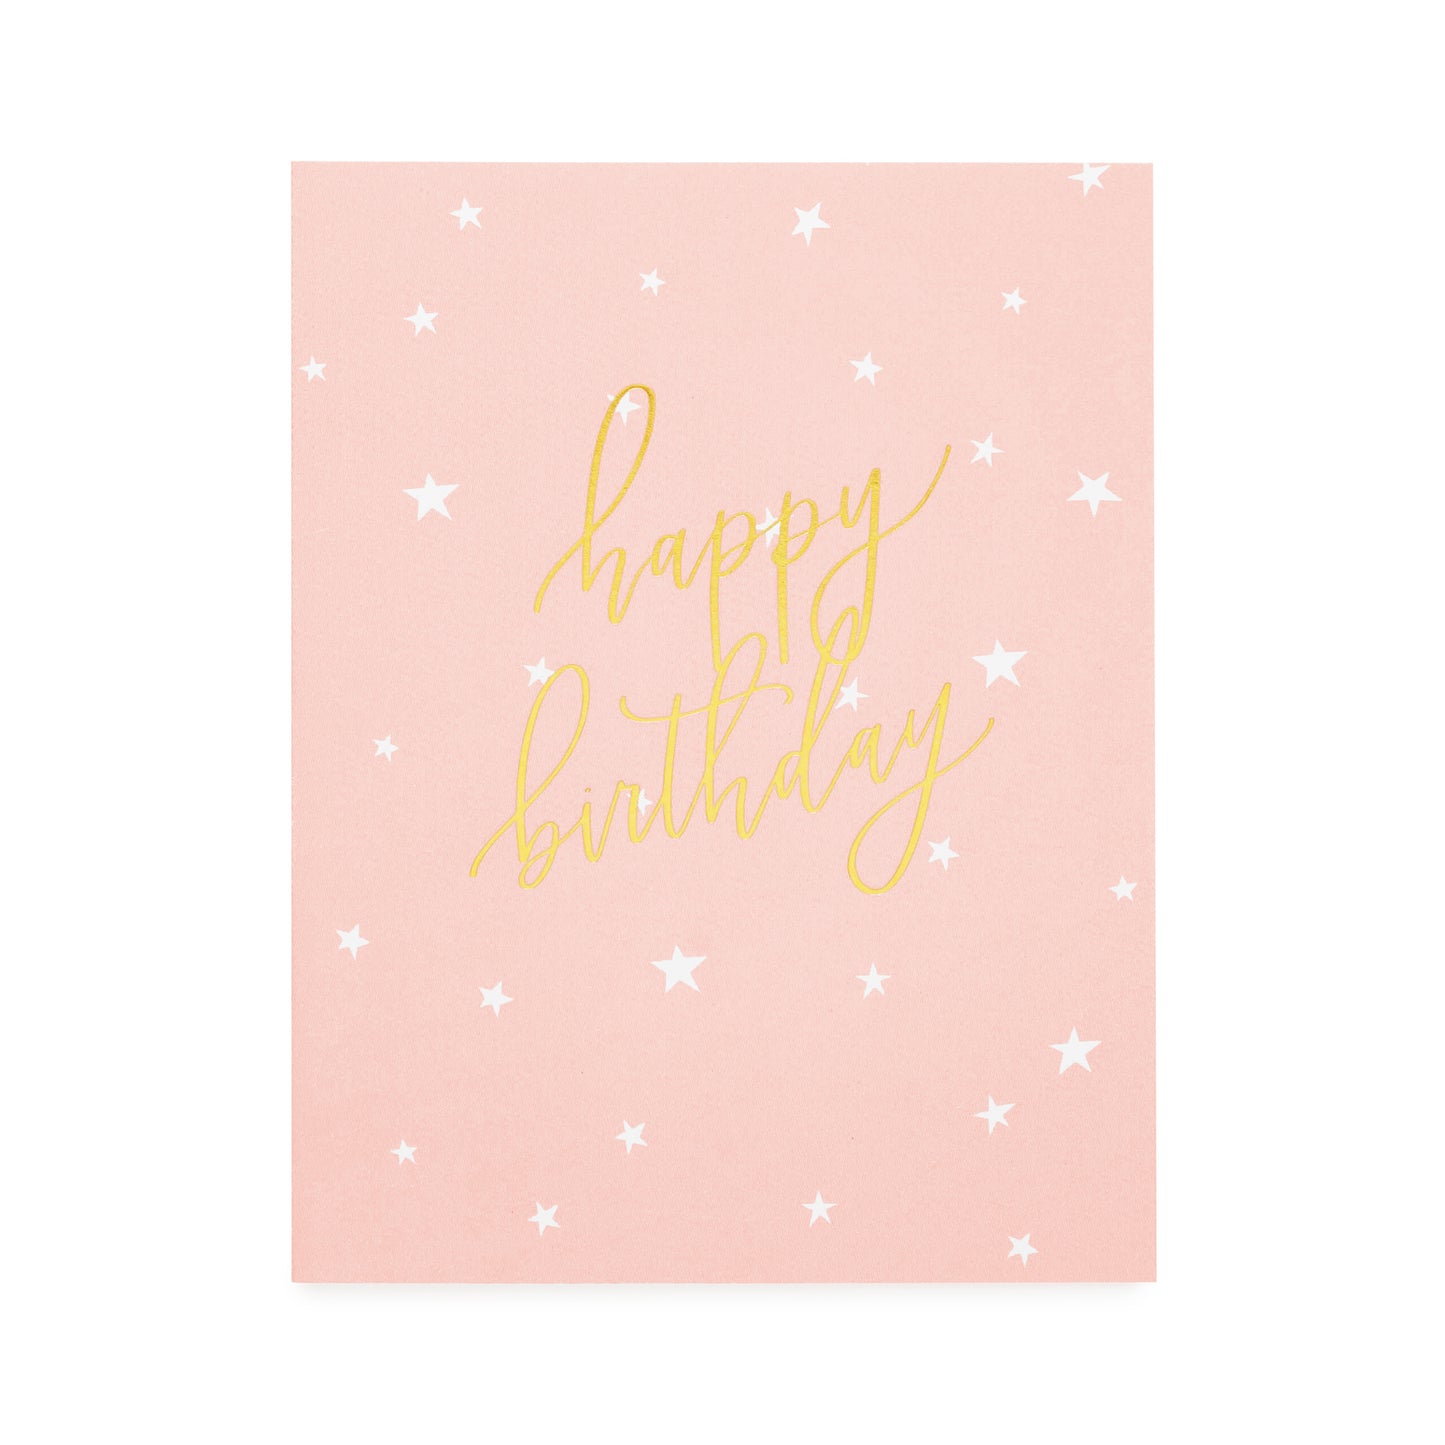 rose pink card with white scattered stars and gold script happy birthday